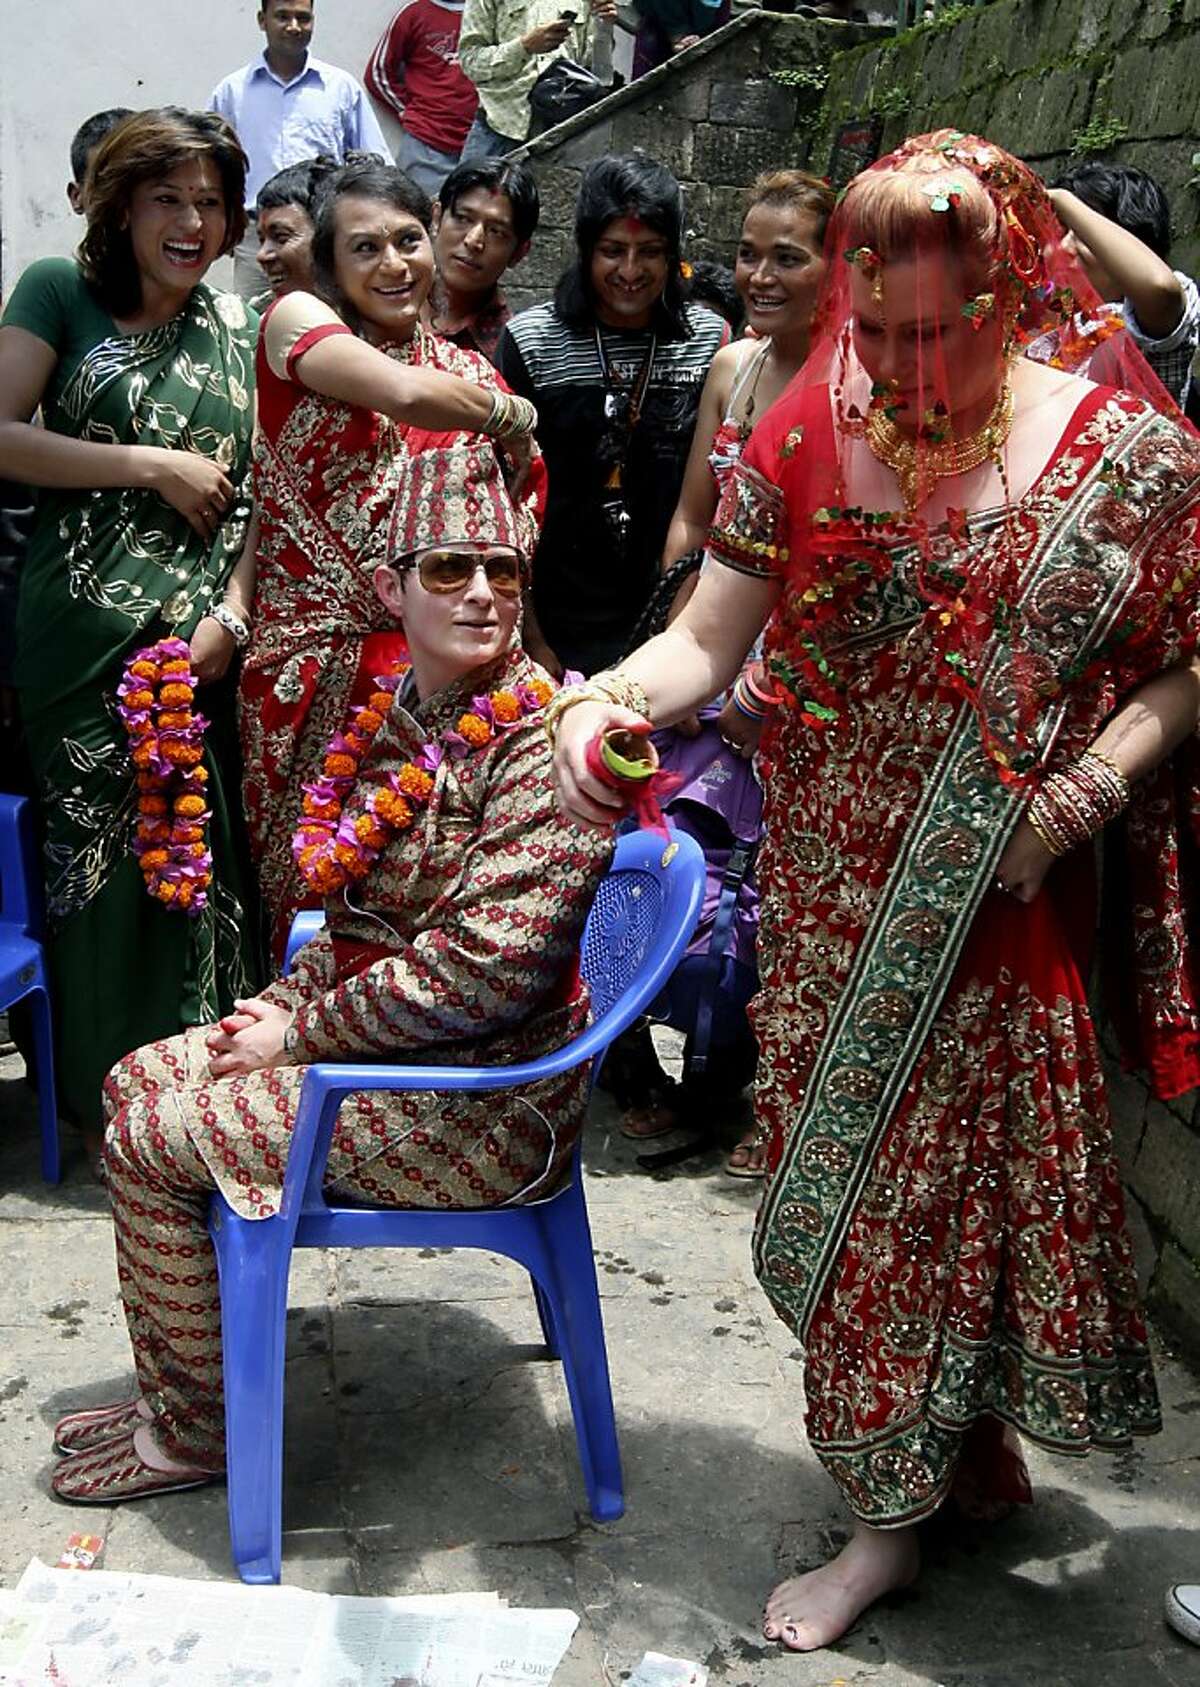 Same Sex Couple Weds In Nepal